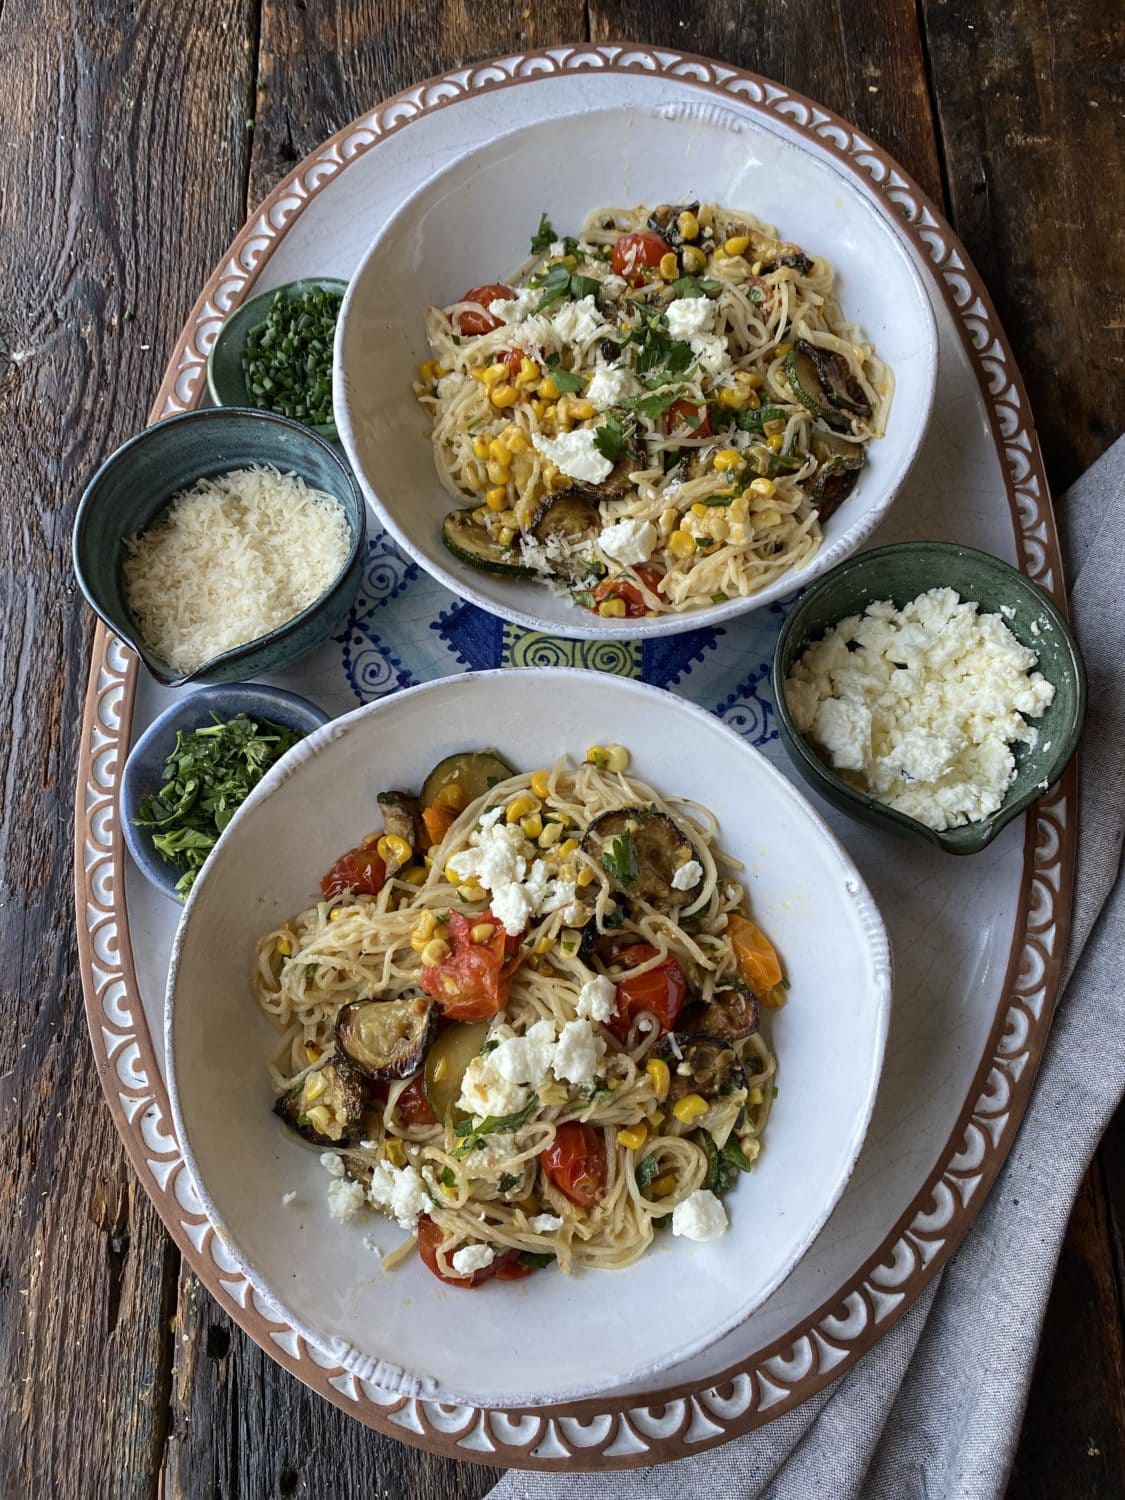 two plated dishes of pasta primavera with cheese